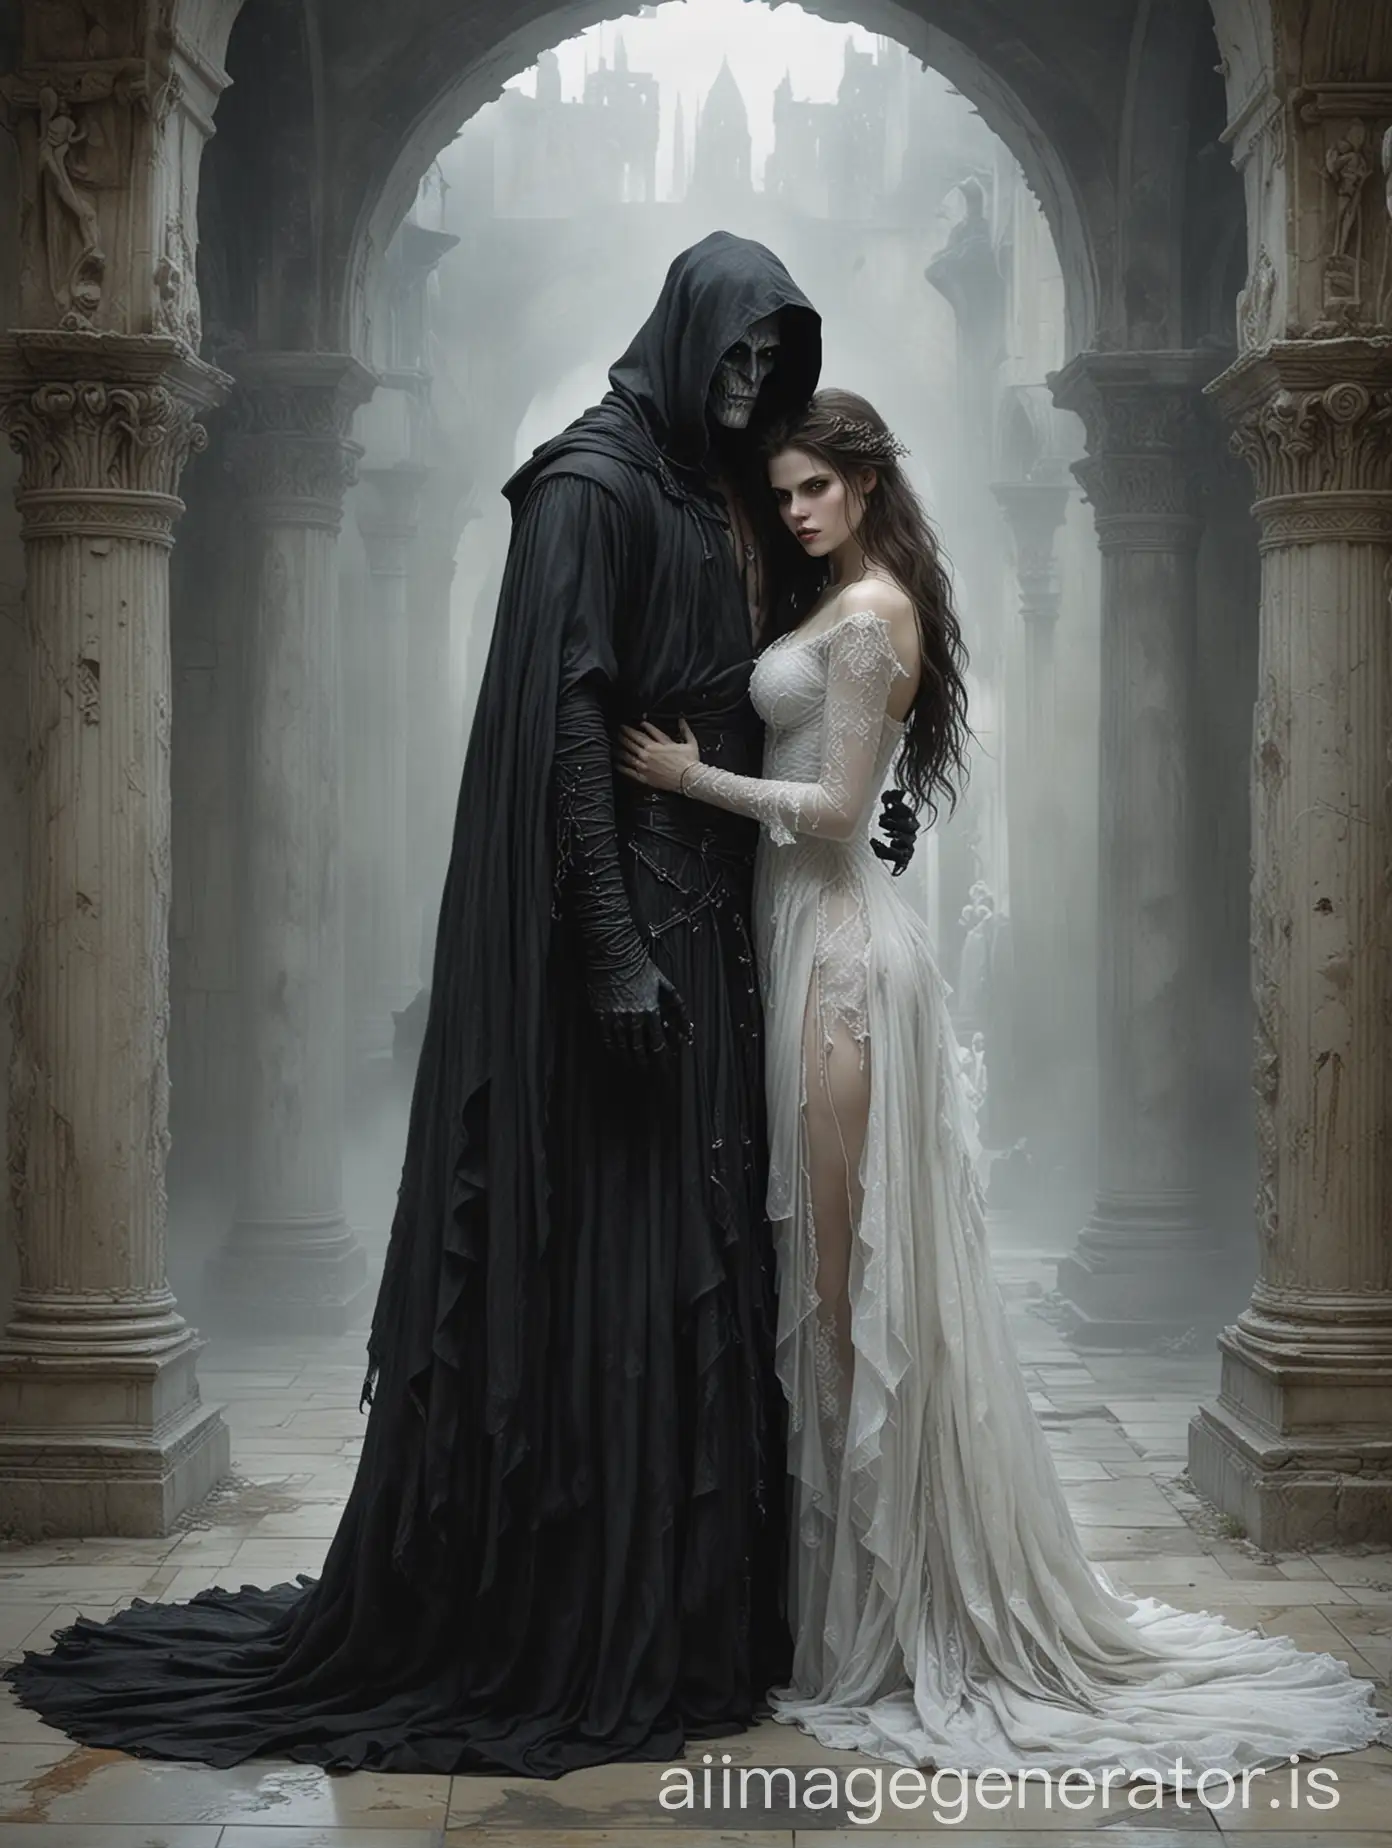 luis royo dark art style, alexandra daddario face, wedding couple of woman and demon, woman in an embrace with a demon tall man creature in black hood, raggedy wedding dress translucent, innocent woman wedding with a demon, standing on a marble floor, ancient ruins blurry foggy background